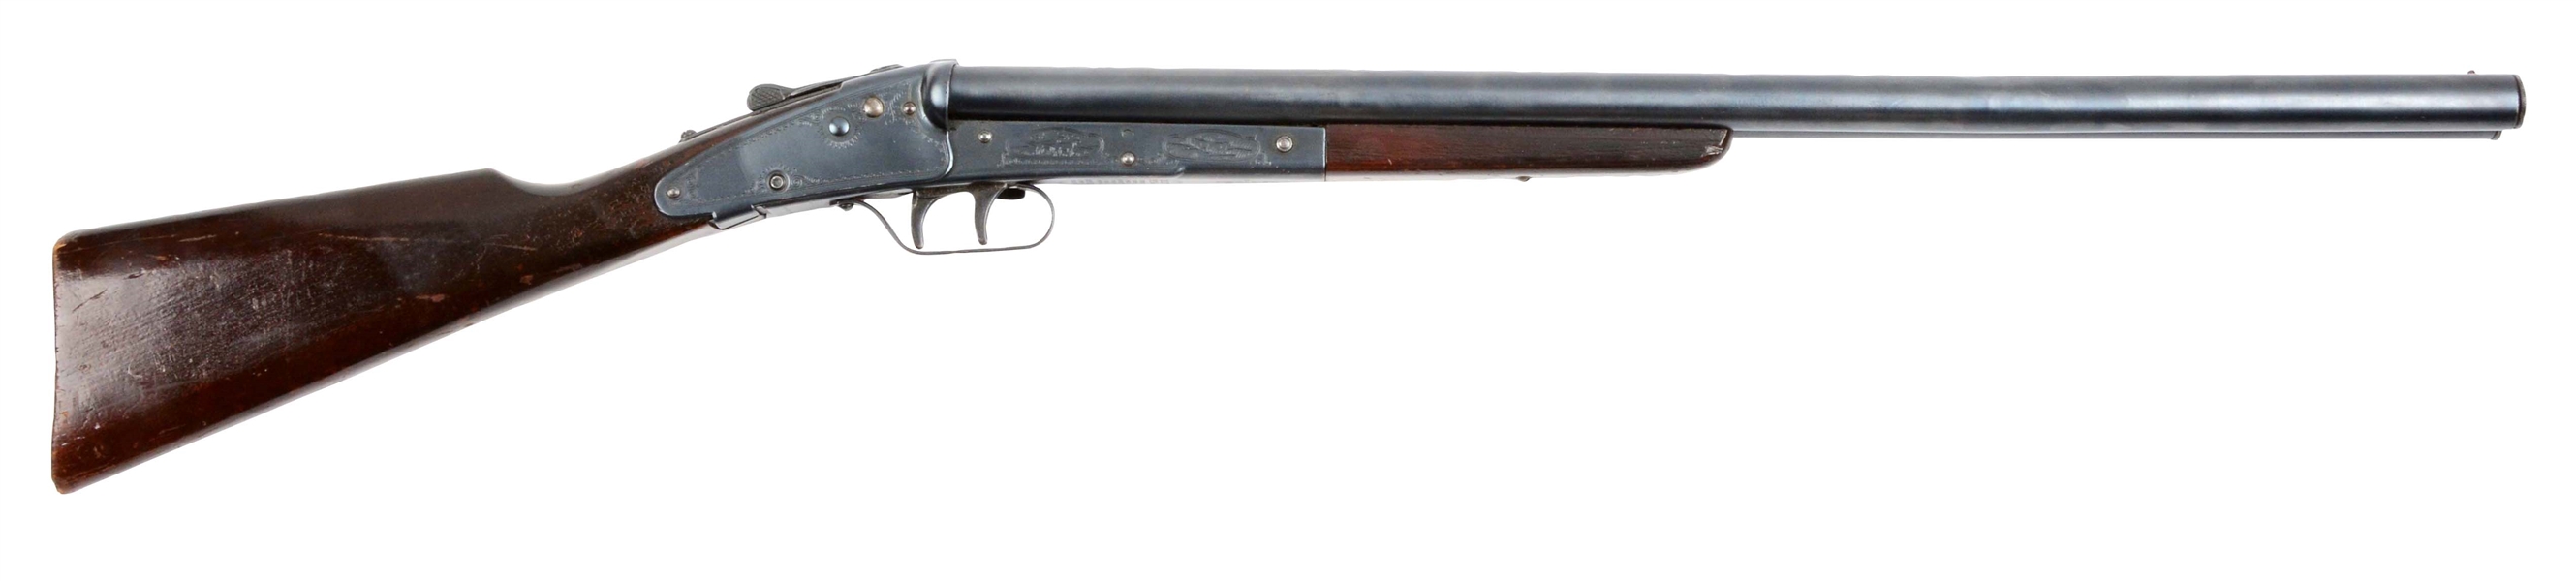 DAISY MODEL 104 SIDE BY SIDE AIR RIFLE. 